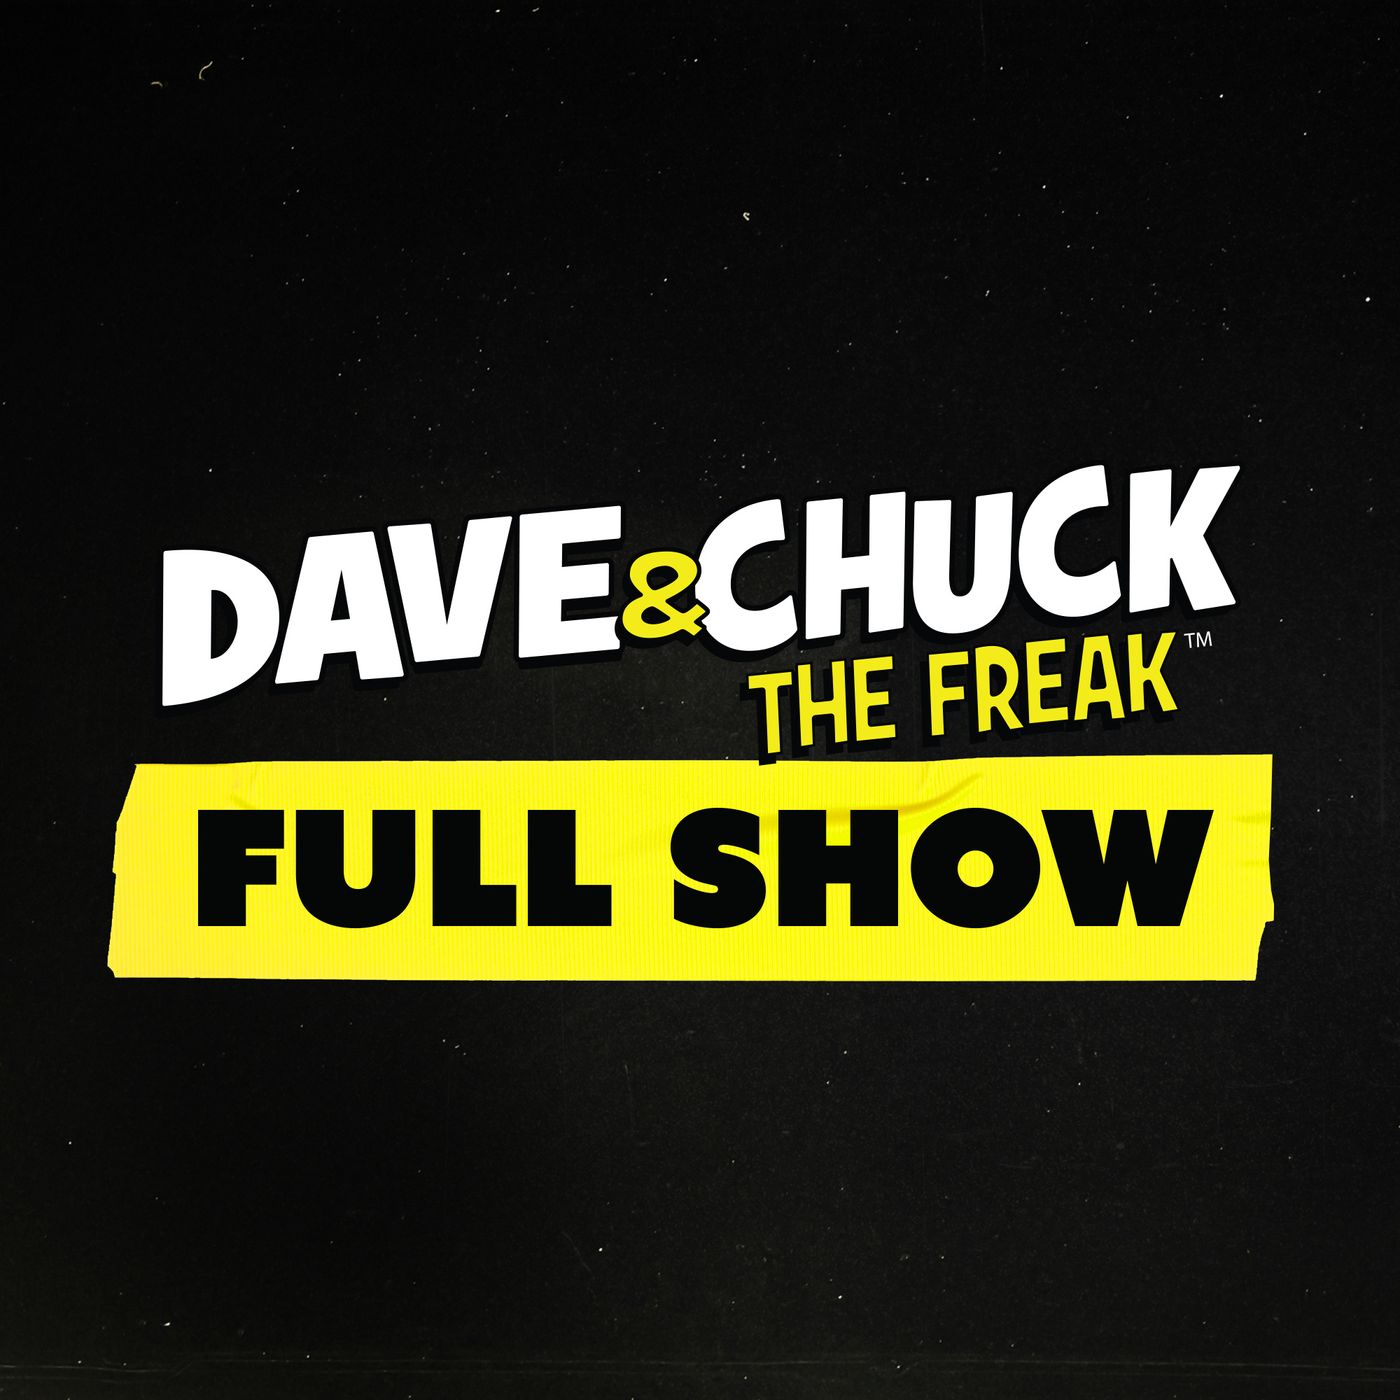 Wednesday, May 17th 2023 Dave & Chuck the Freak Full Show